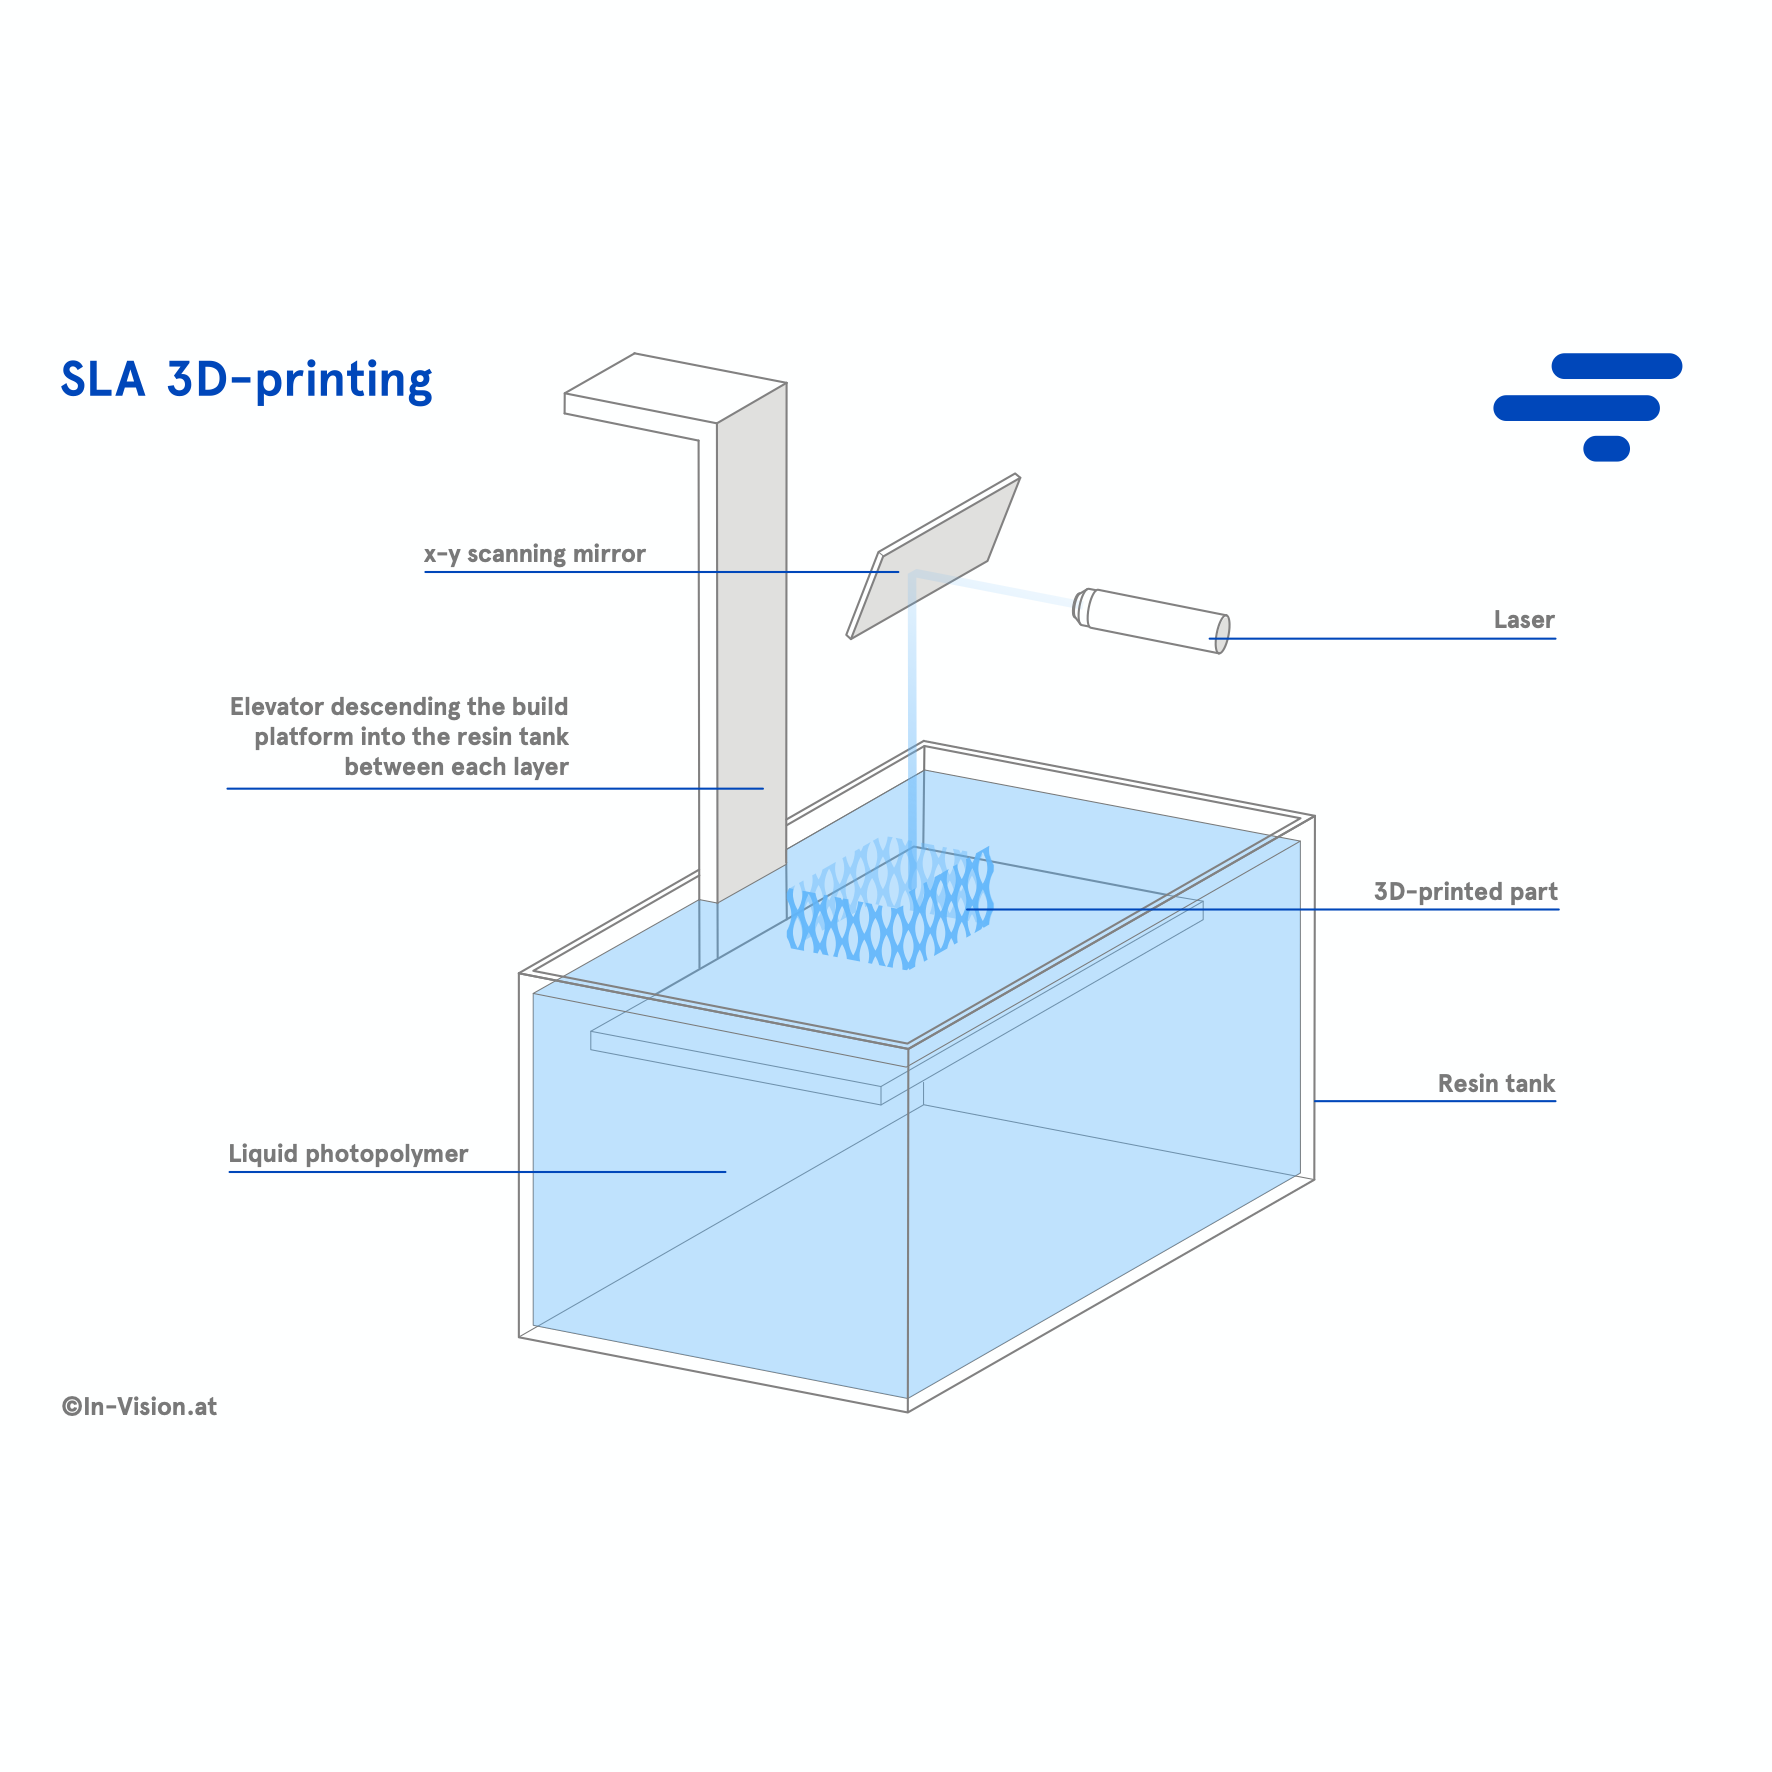 Basic principle of SLA 3D-printing. A laser scans the build area and cures each layer point by point.